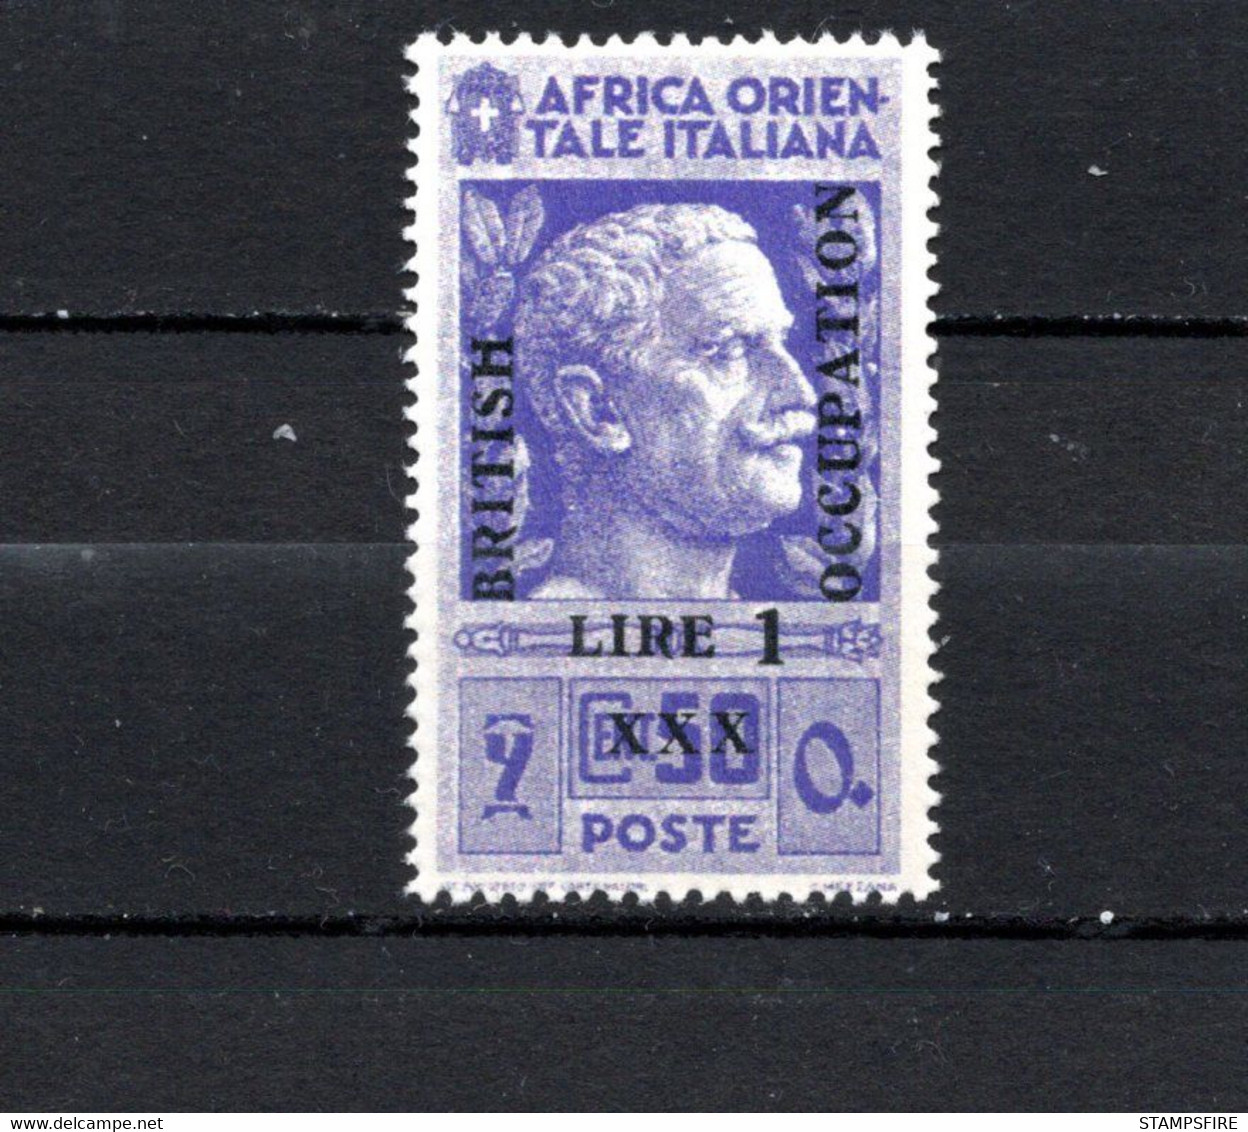 British Occupation Italy  Unissued 1941  Africa RARE MNH - Africa Orientale